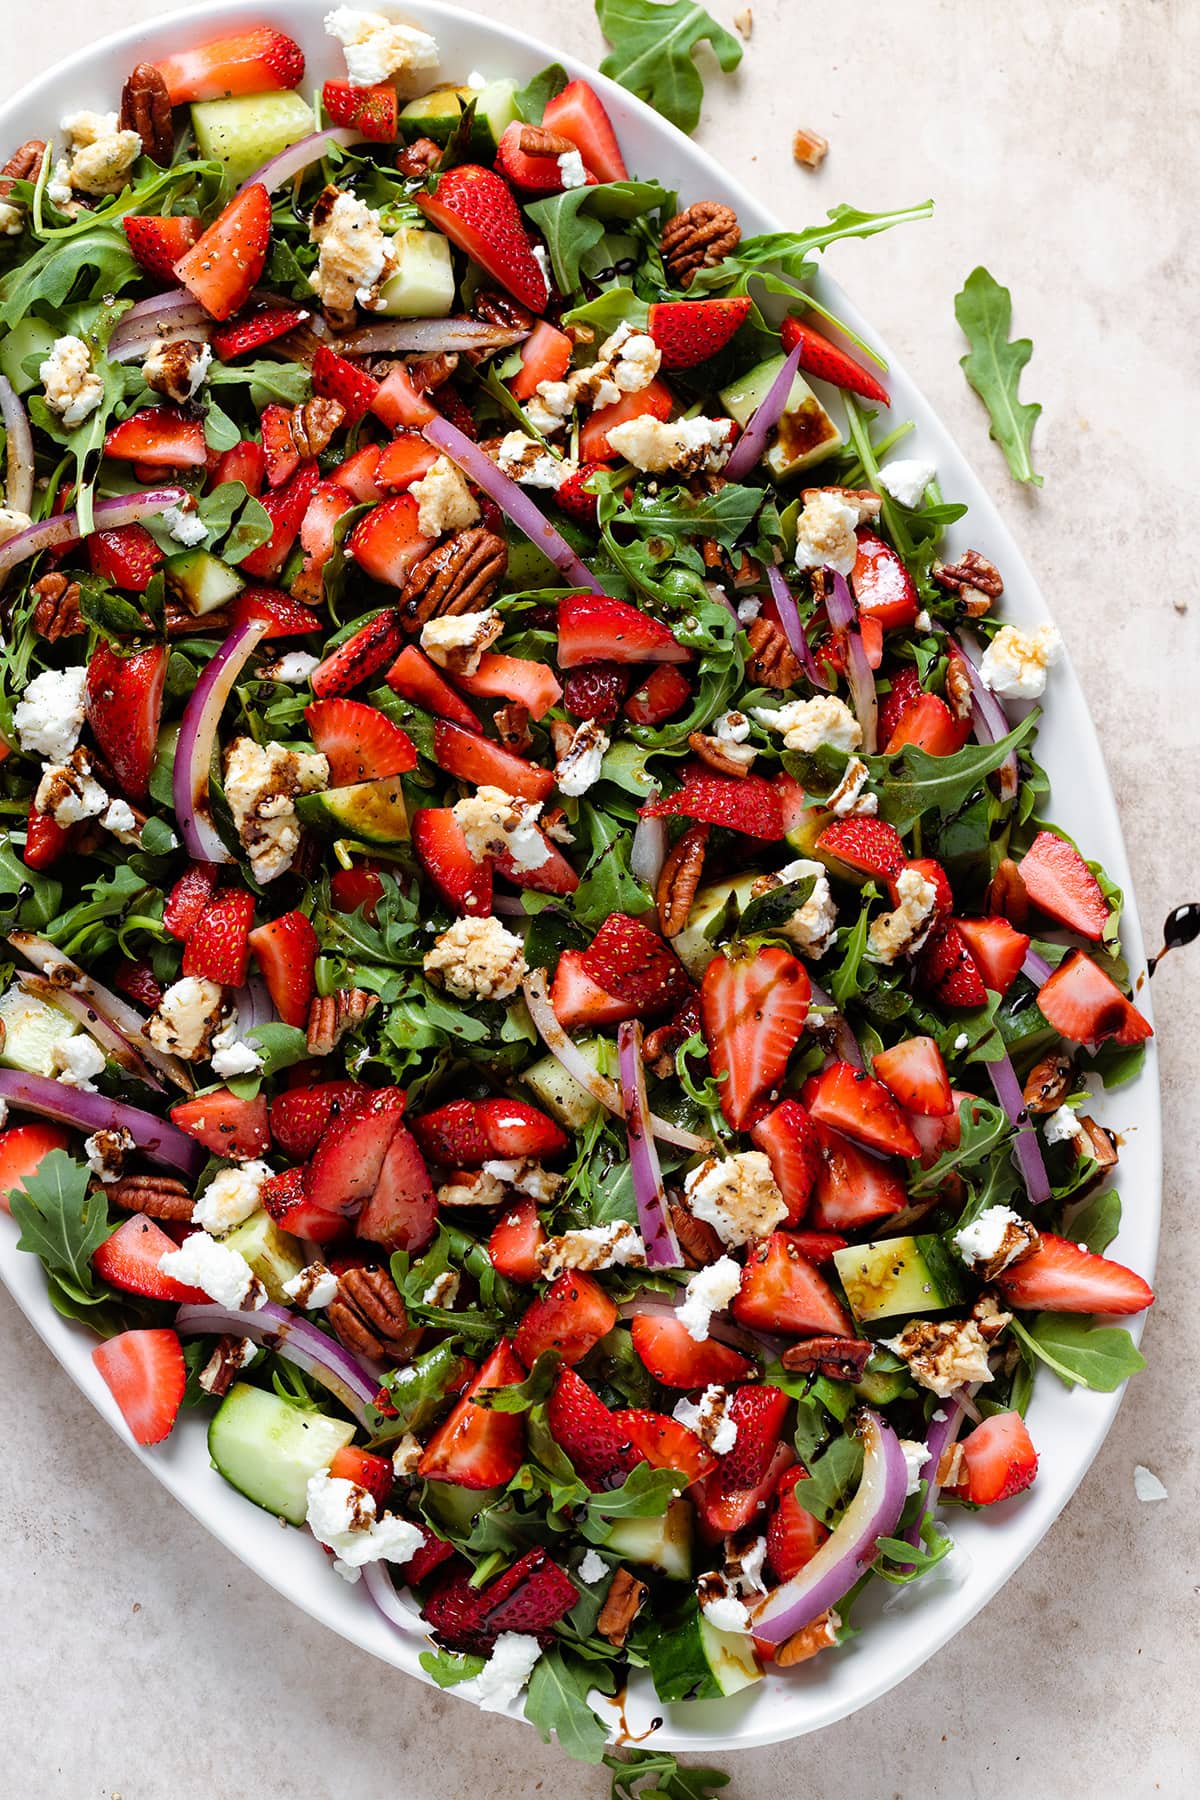 Strawberry goat cheese salad drizzled with balsamic glaze on a large white plate.